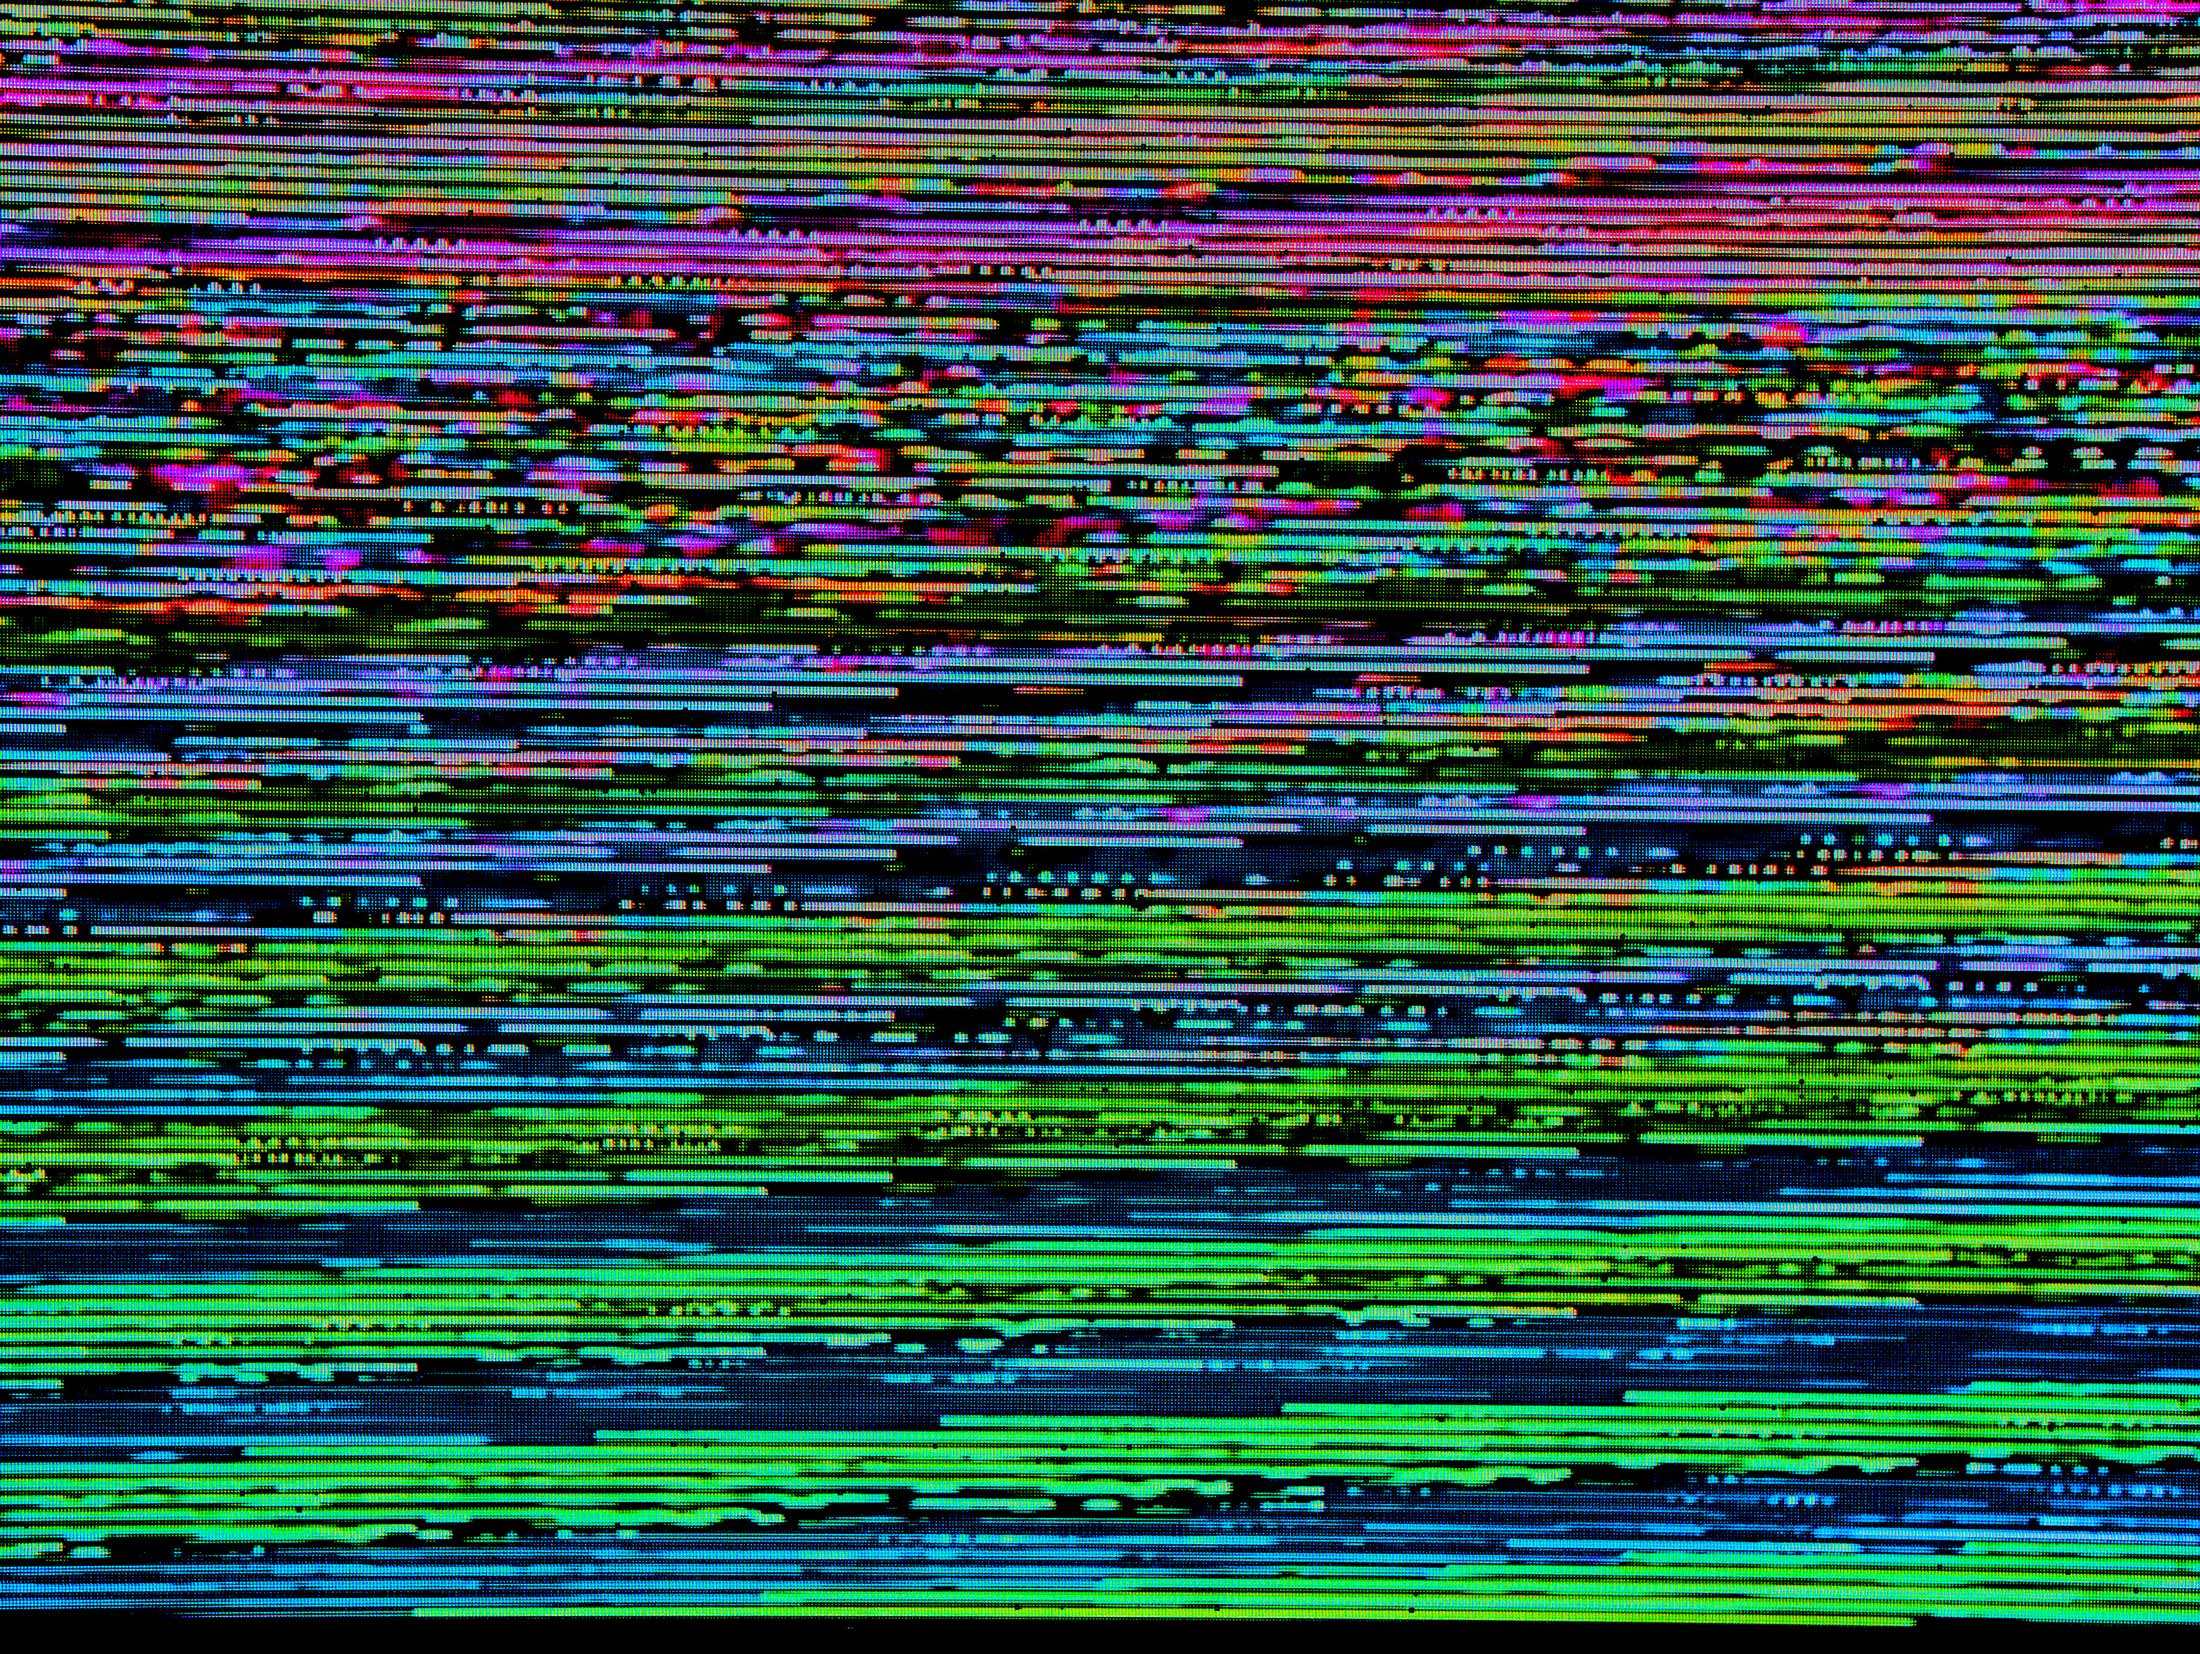 Error glitch screen, show loads of pixel dots in green and red lines across the screen horizontally.